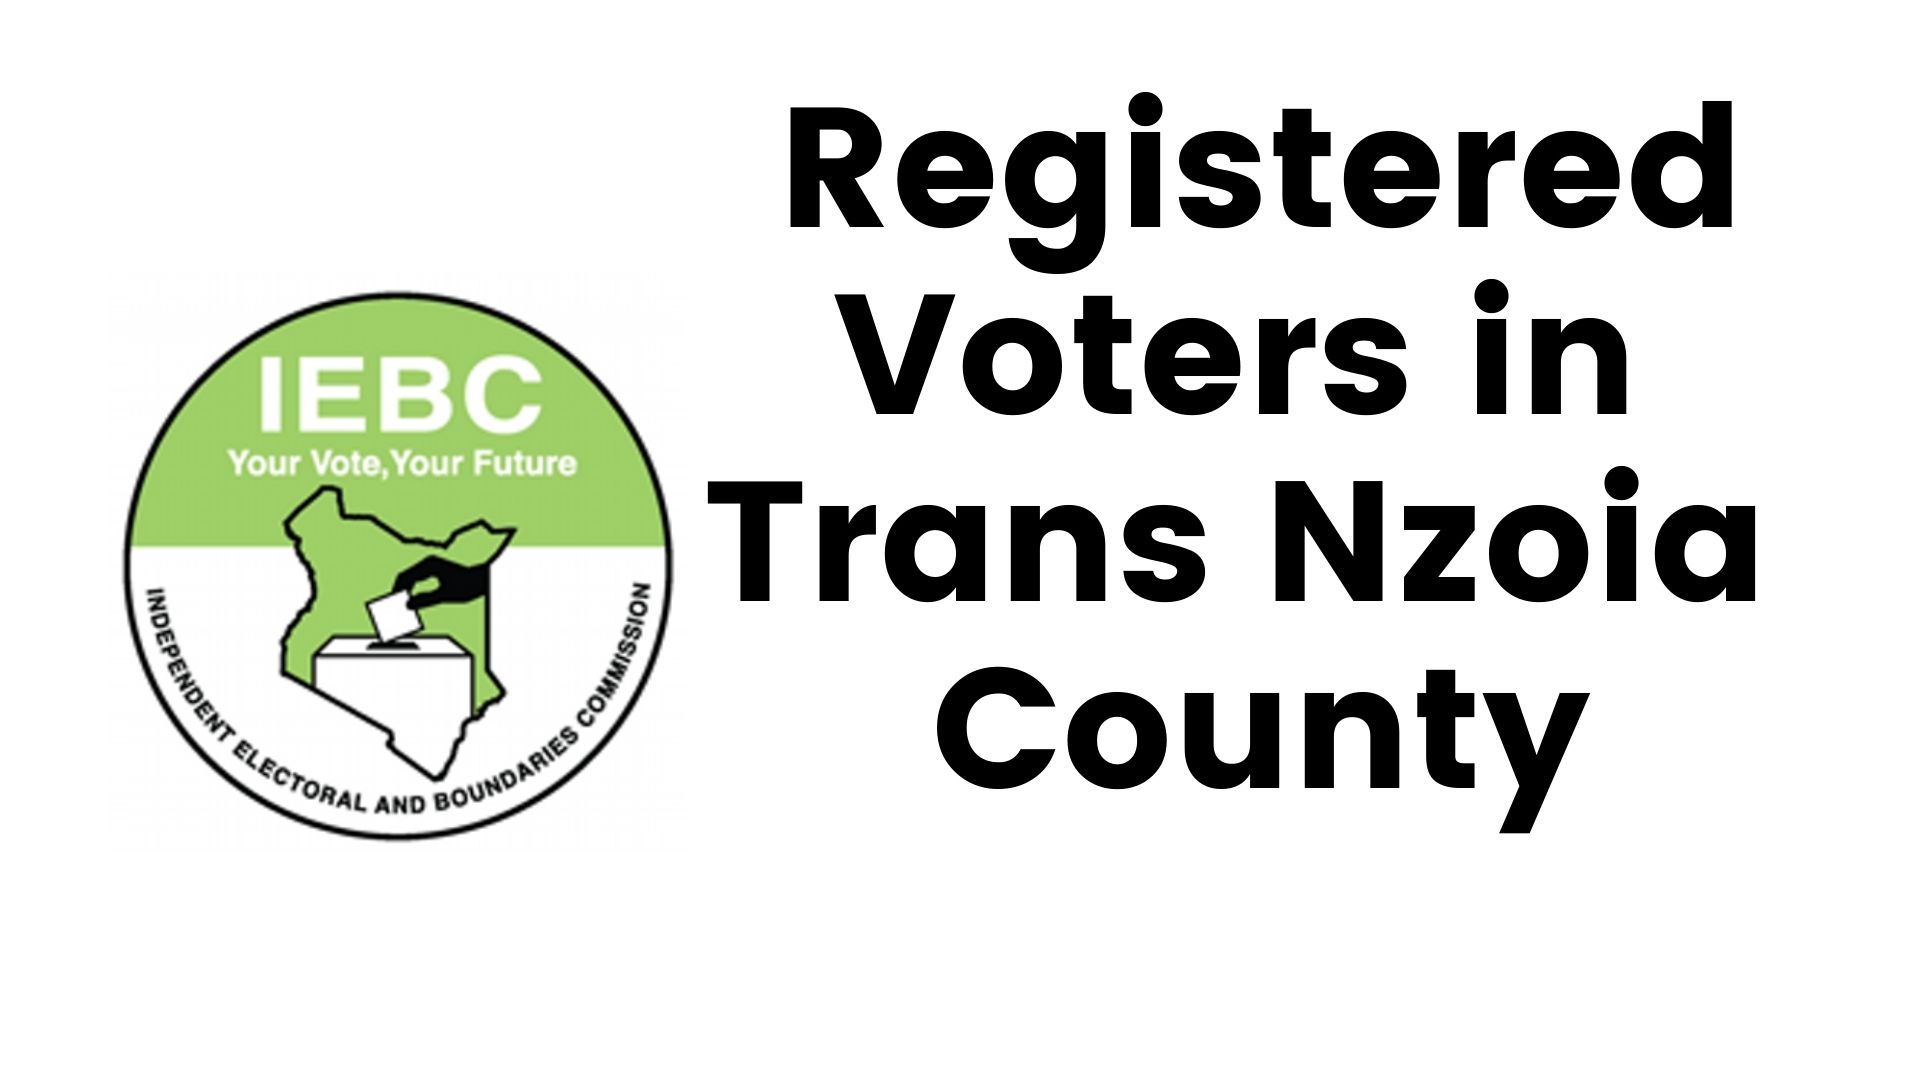 IEBC Trans Nzoia County Registered Voters